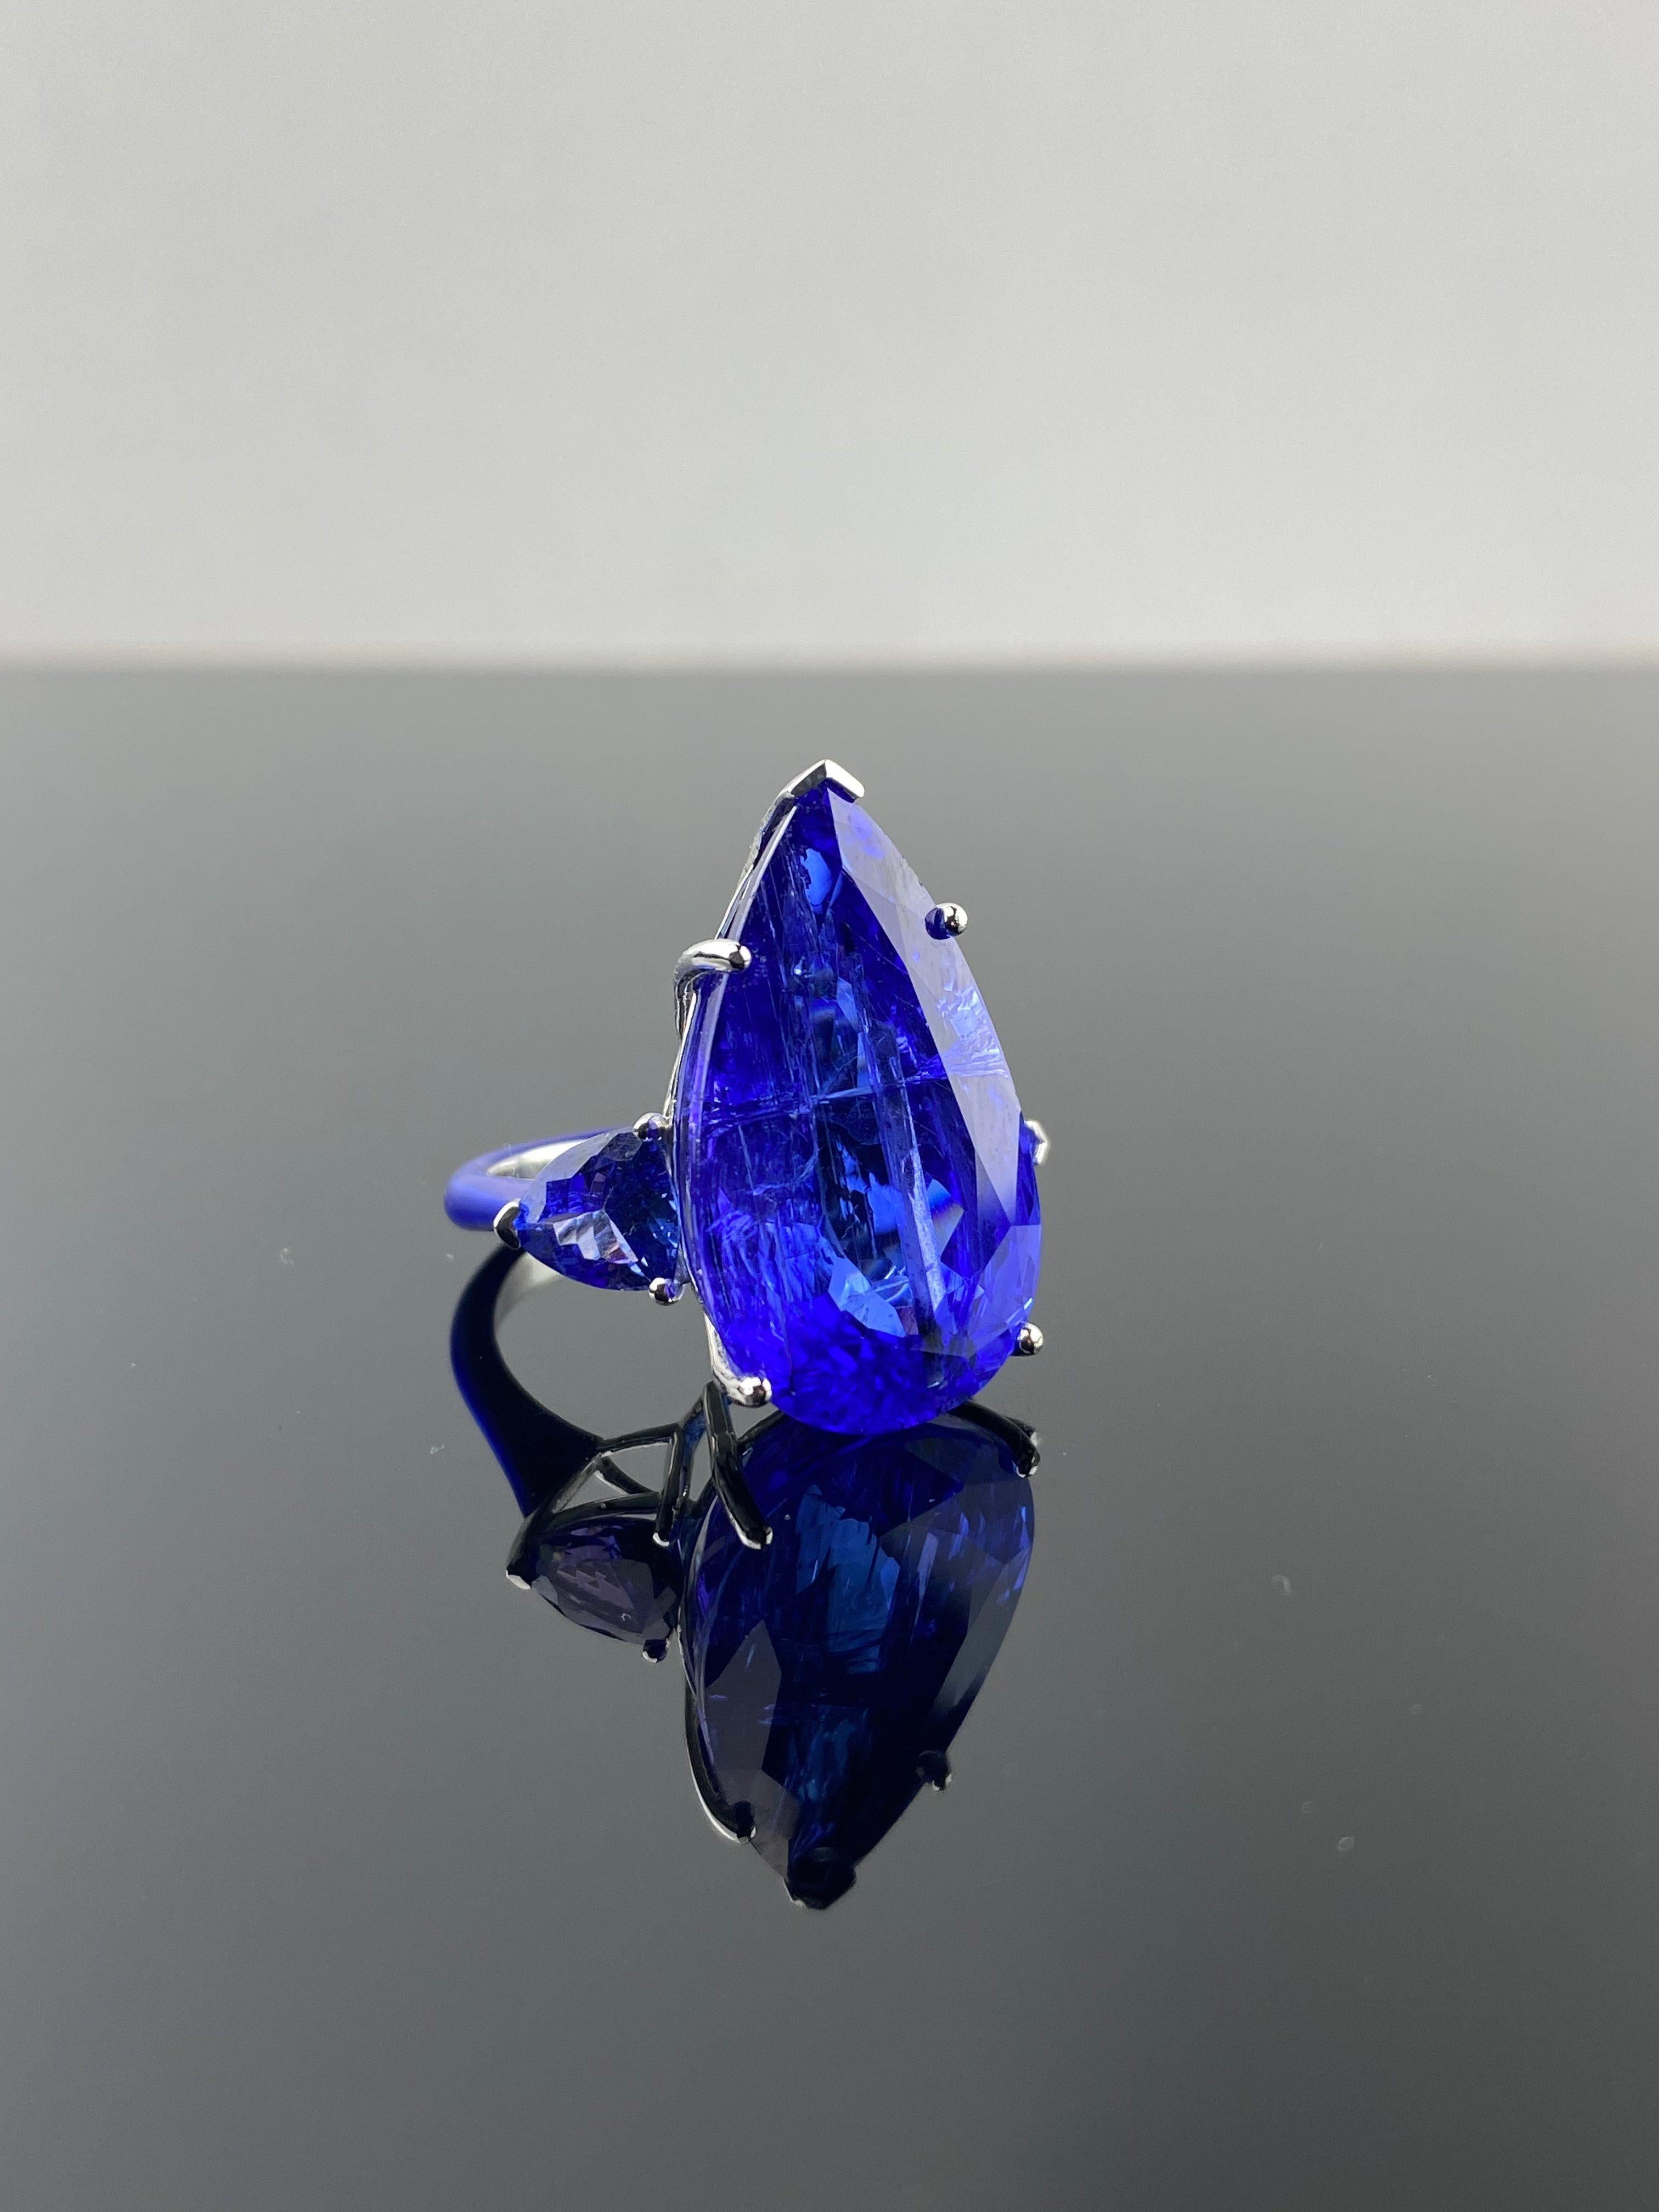 A statement violet-blue 28.96 carat pear shape Tanzanite center piece with 1.98 carat pear shape Tanzanite side stones set in 18K White Gold. The royal blue enamel on the band makes this ring one of a kind! Currently sized at US7, can be resized.